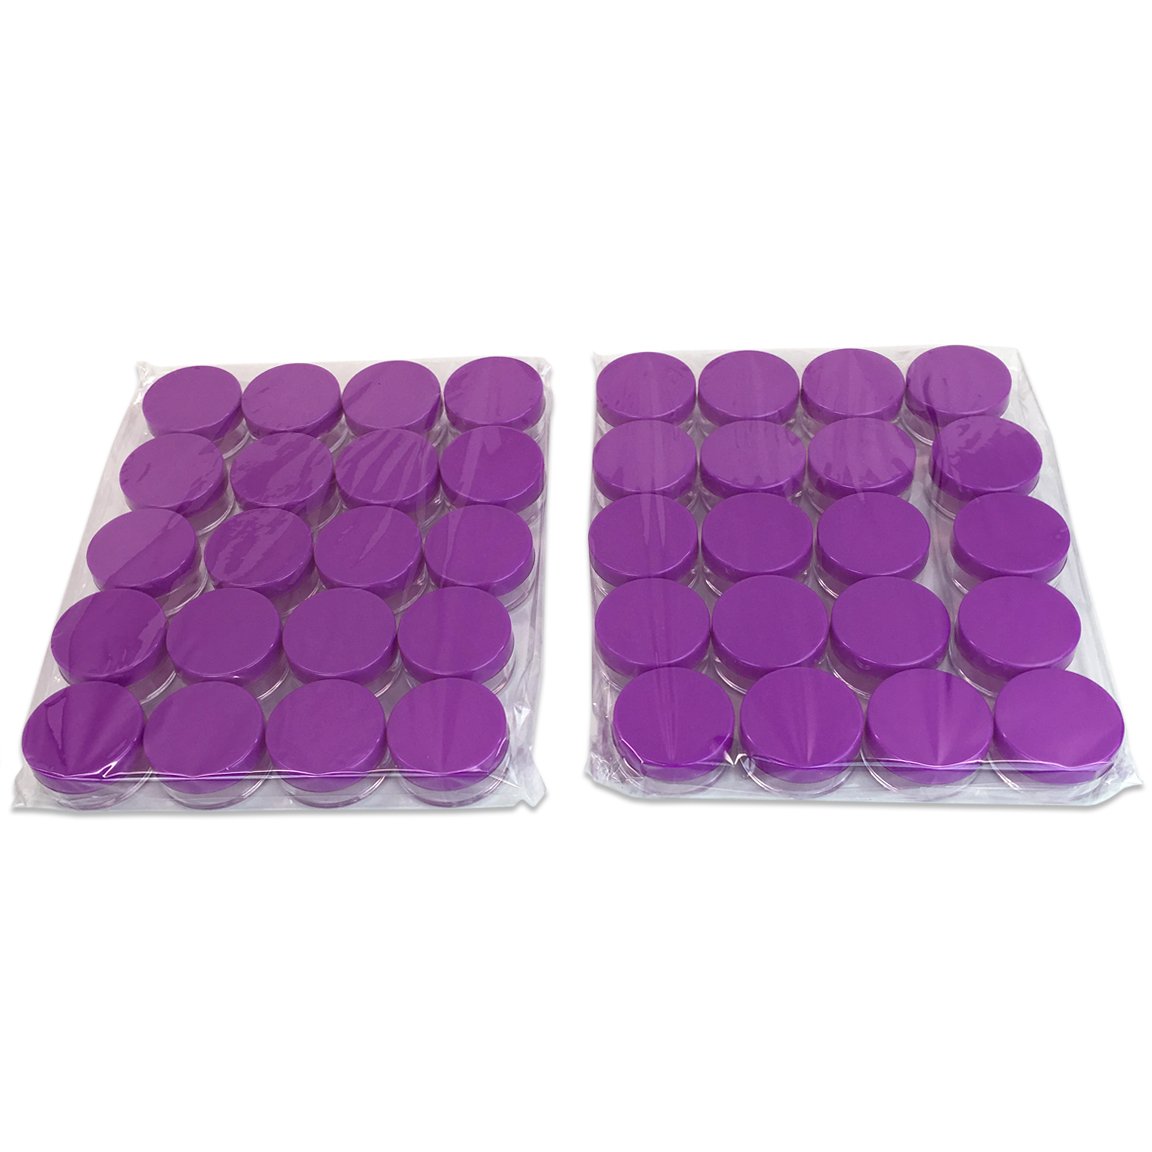 Beauticom 5G/5ML Round Clear Jars with Purple Lids for Jams, Honey, Cooking Oils, Herbs and Spices (Quantity: 100 Pieces)